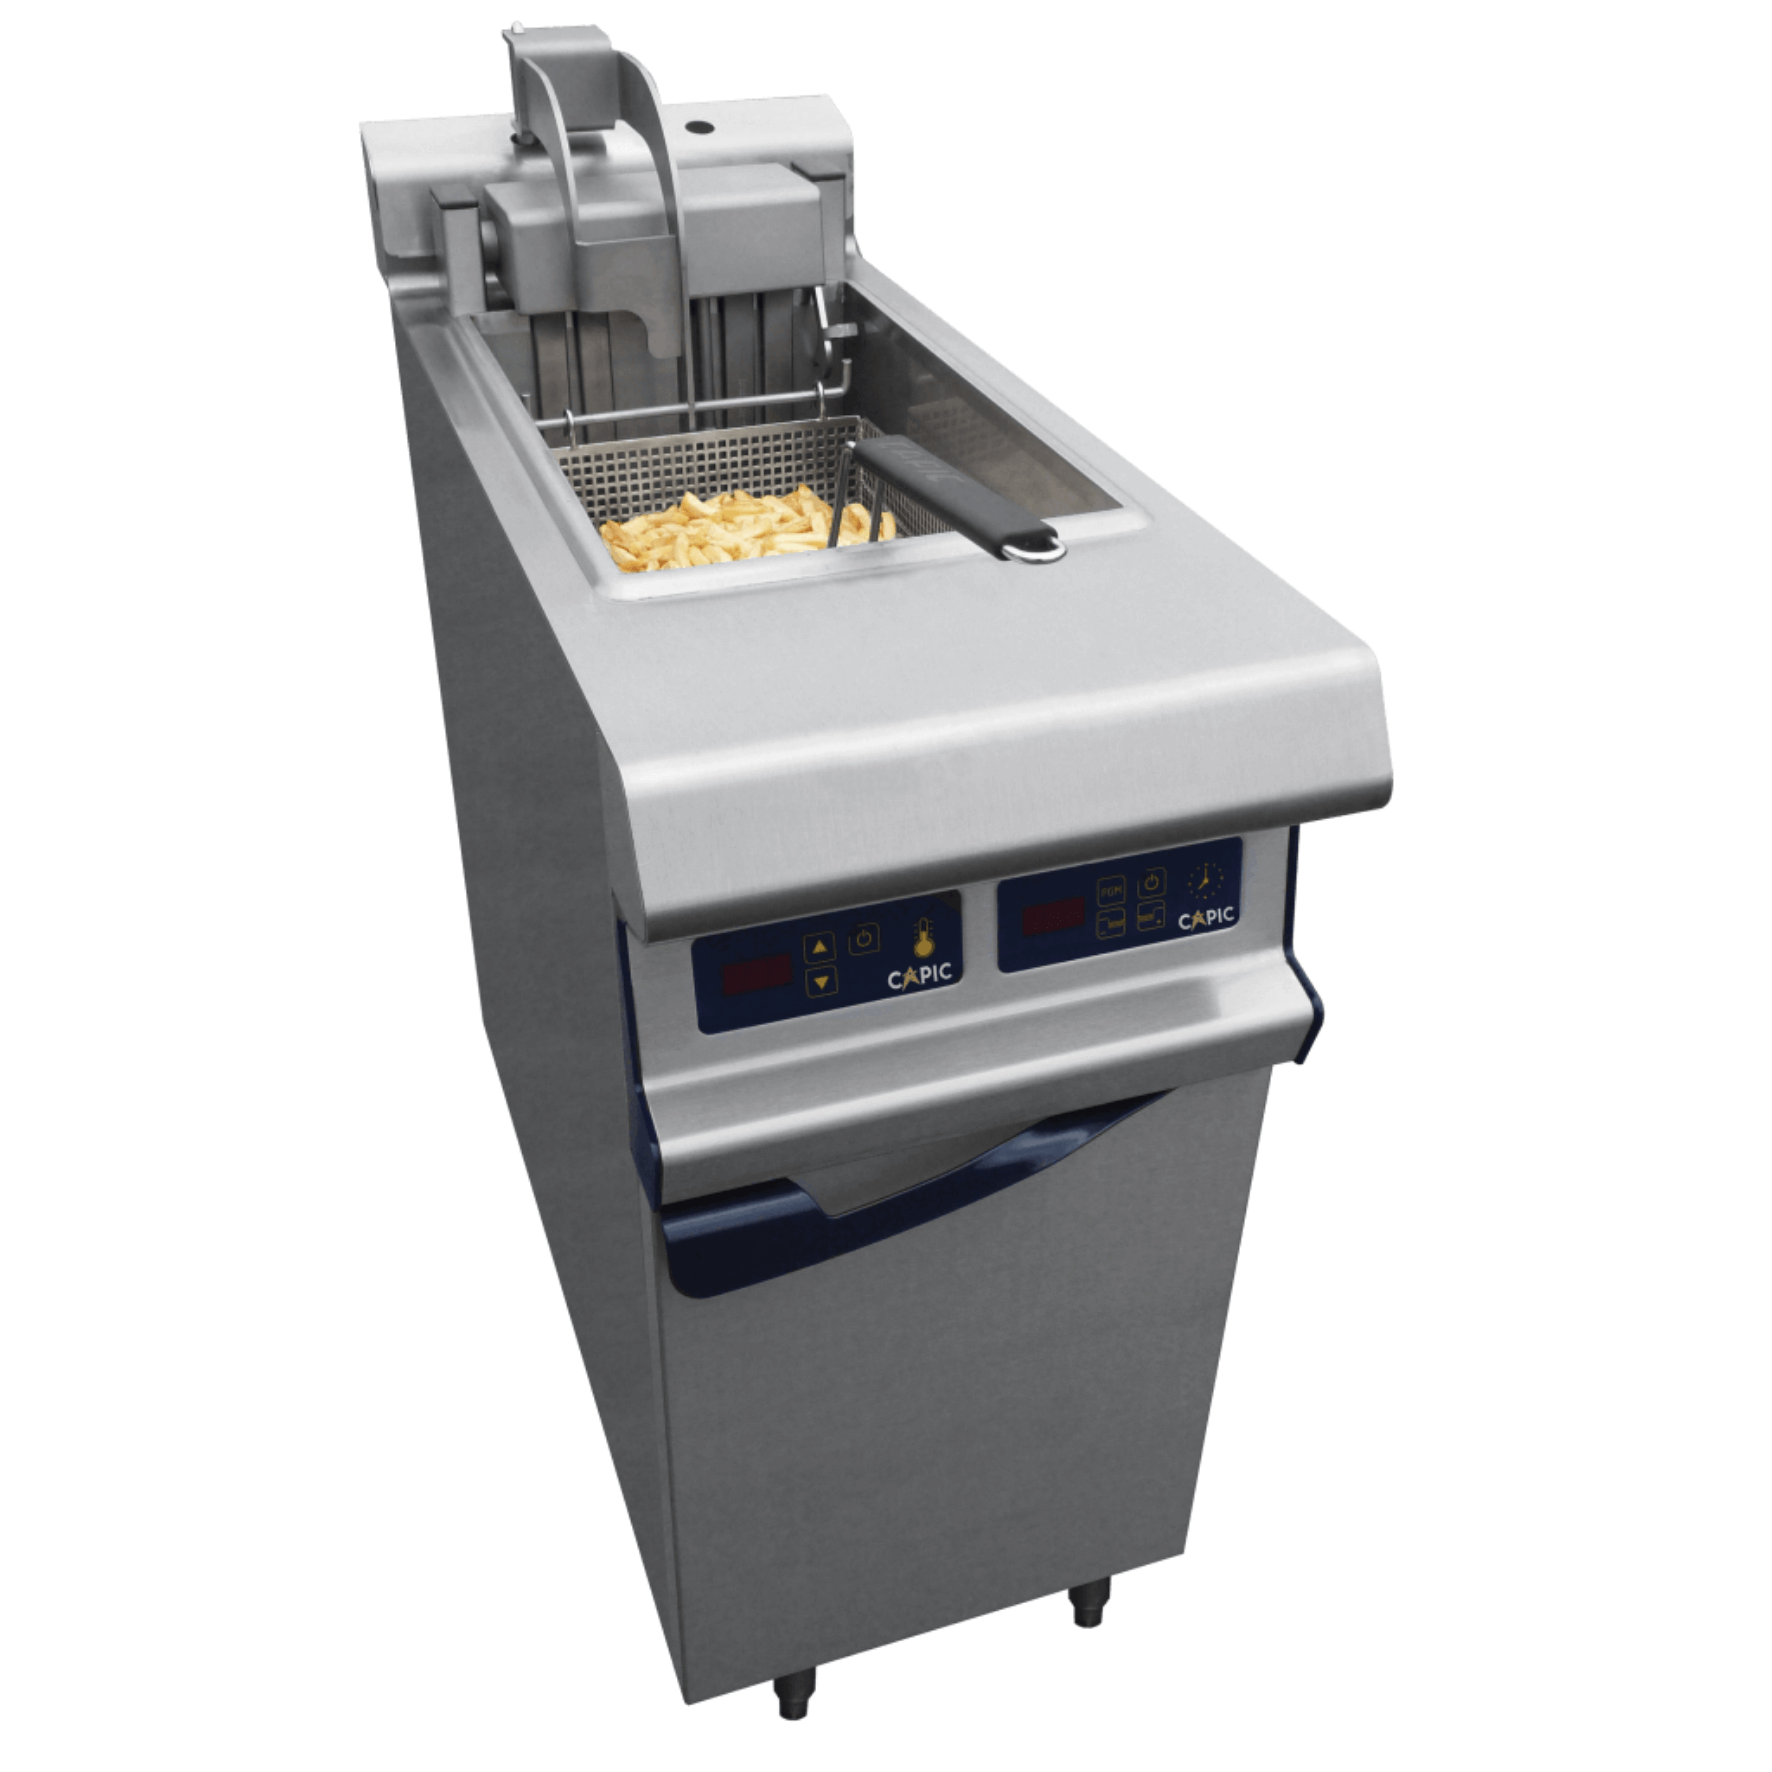 The Dos and Don'ts of a Professional Deep Fryer - Pro Restaurant Equipment